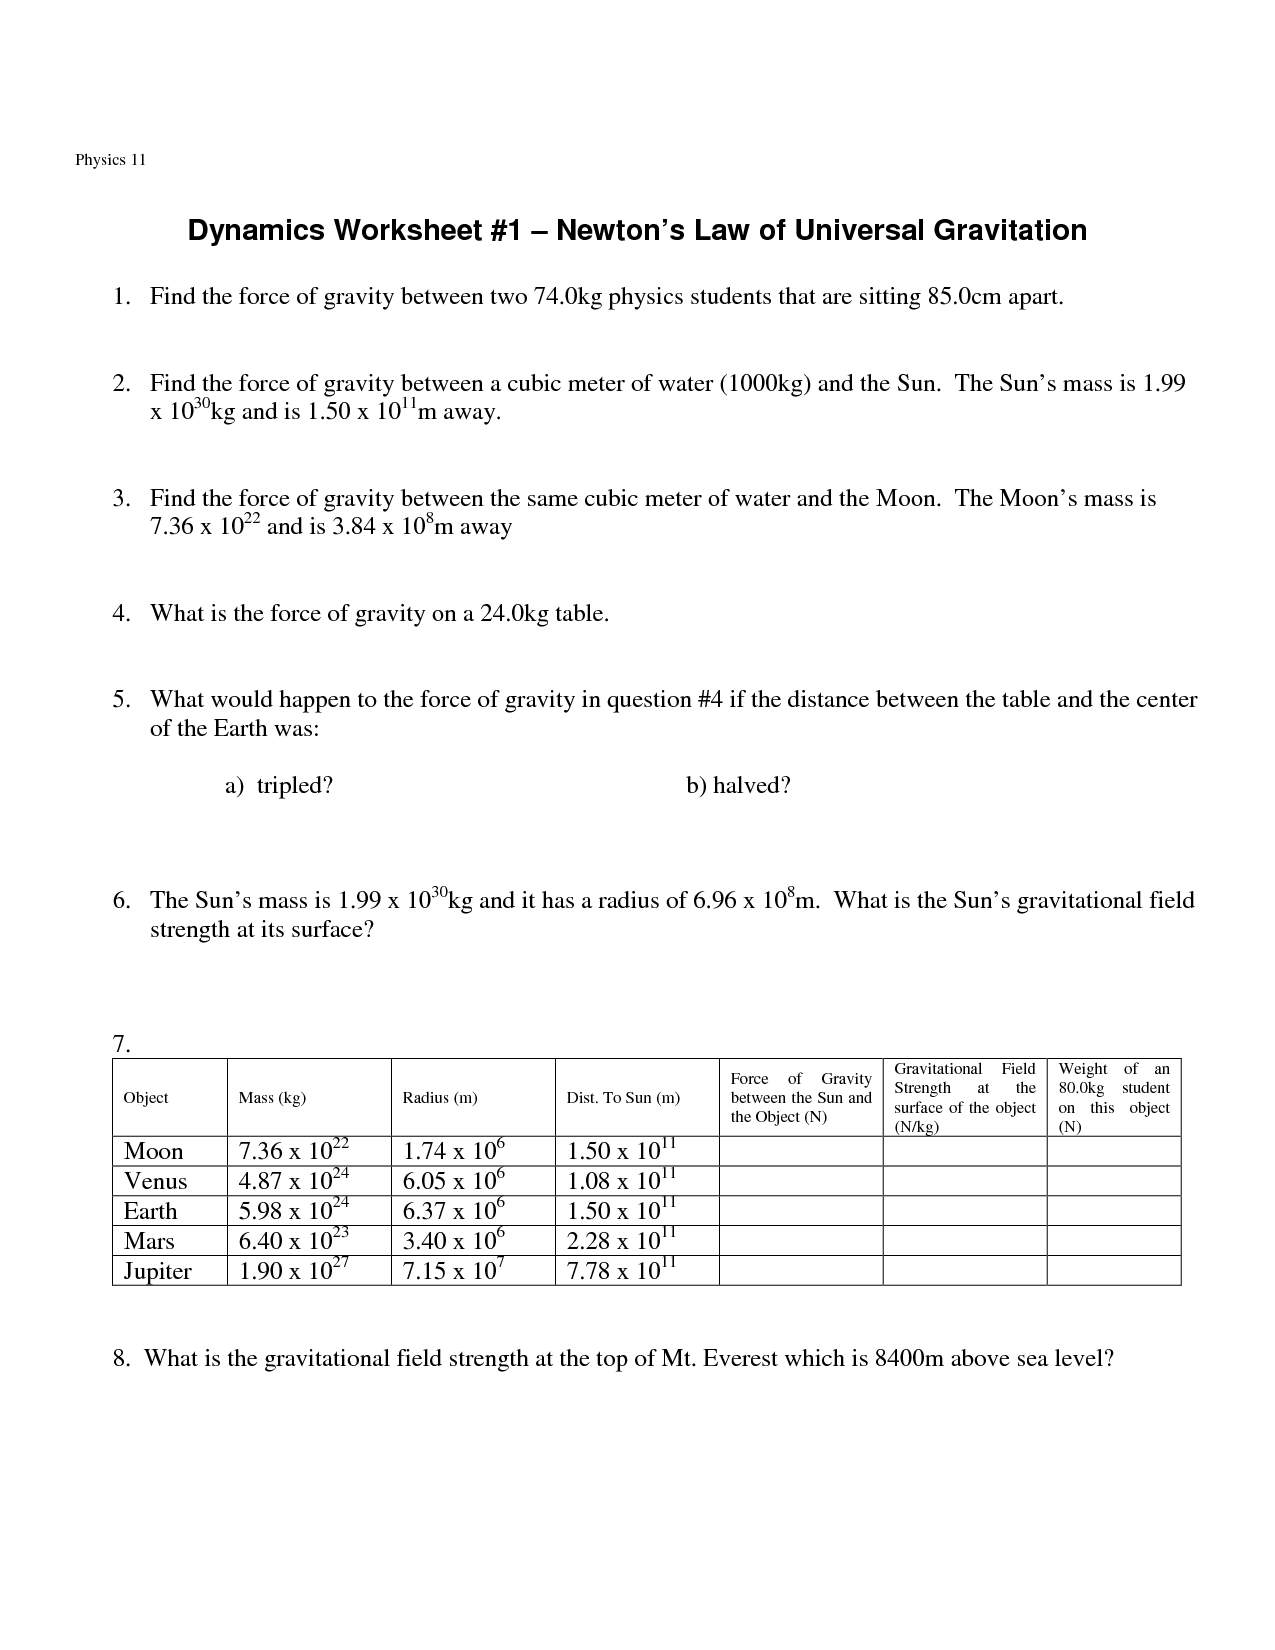 19-best-images-of-newton-s-laws-review-worksheet-answer-keys-newton-s-laws-worksheets-newton